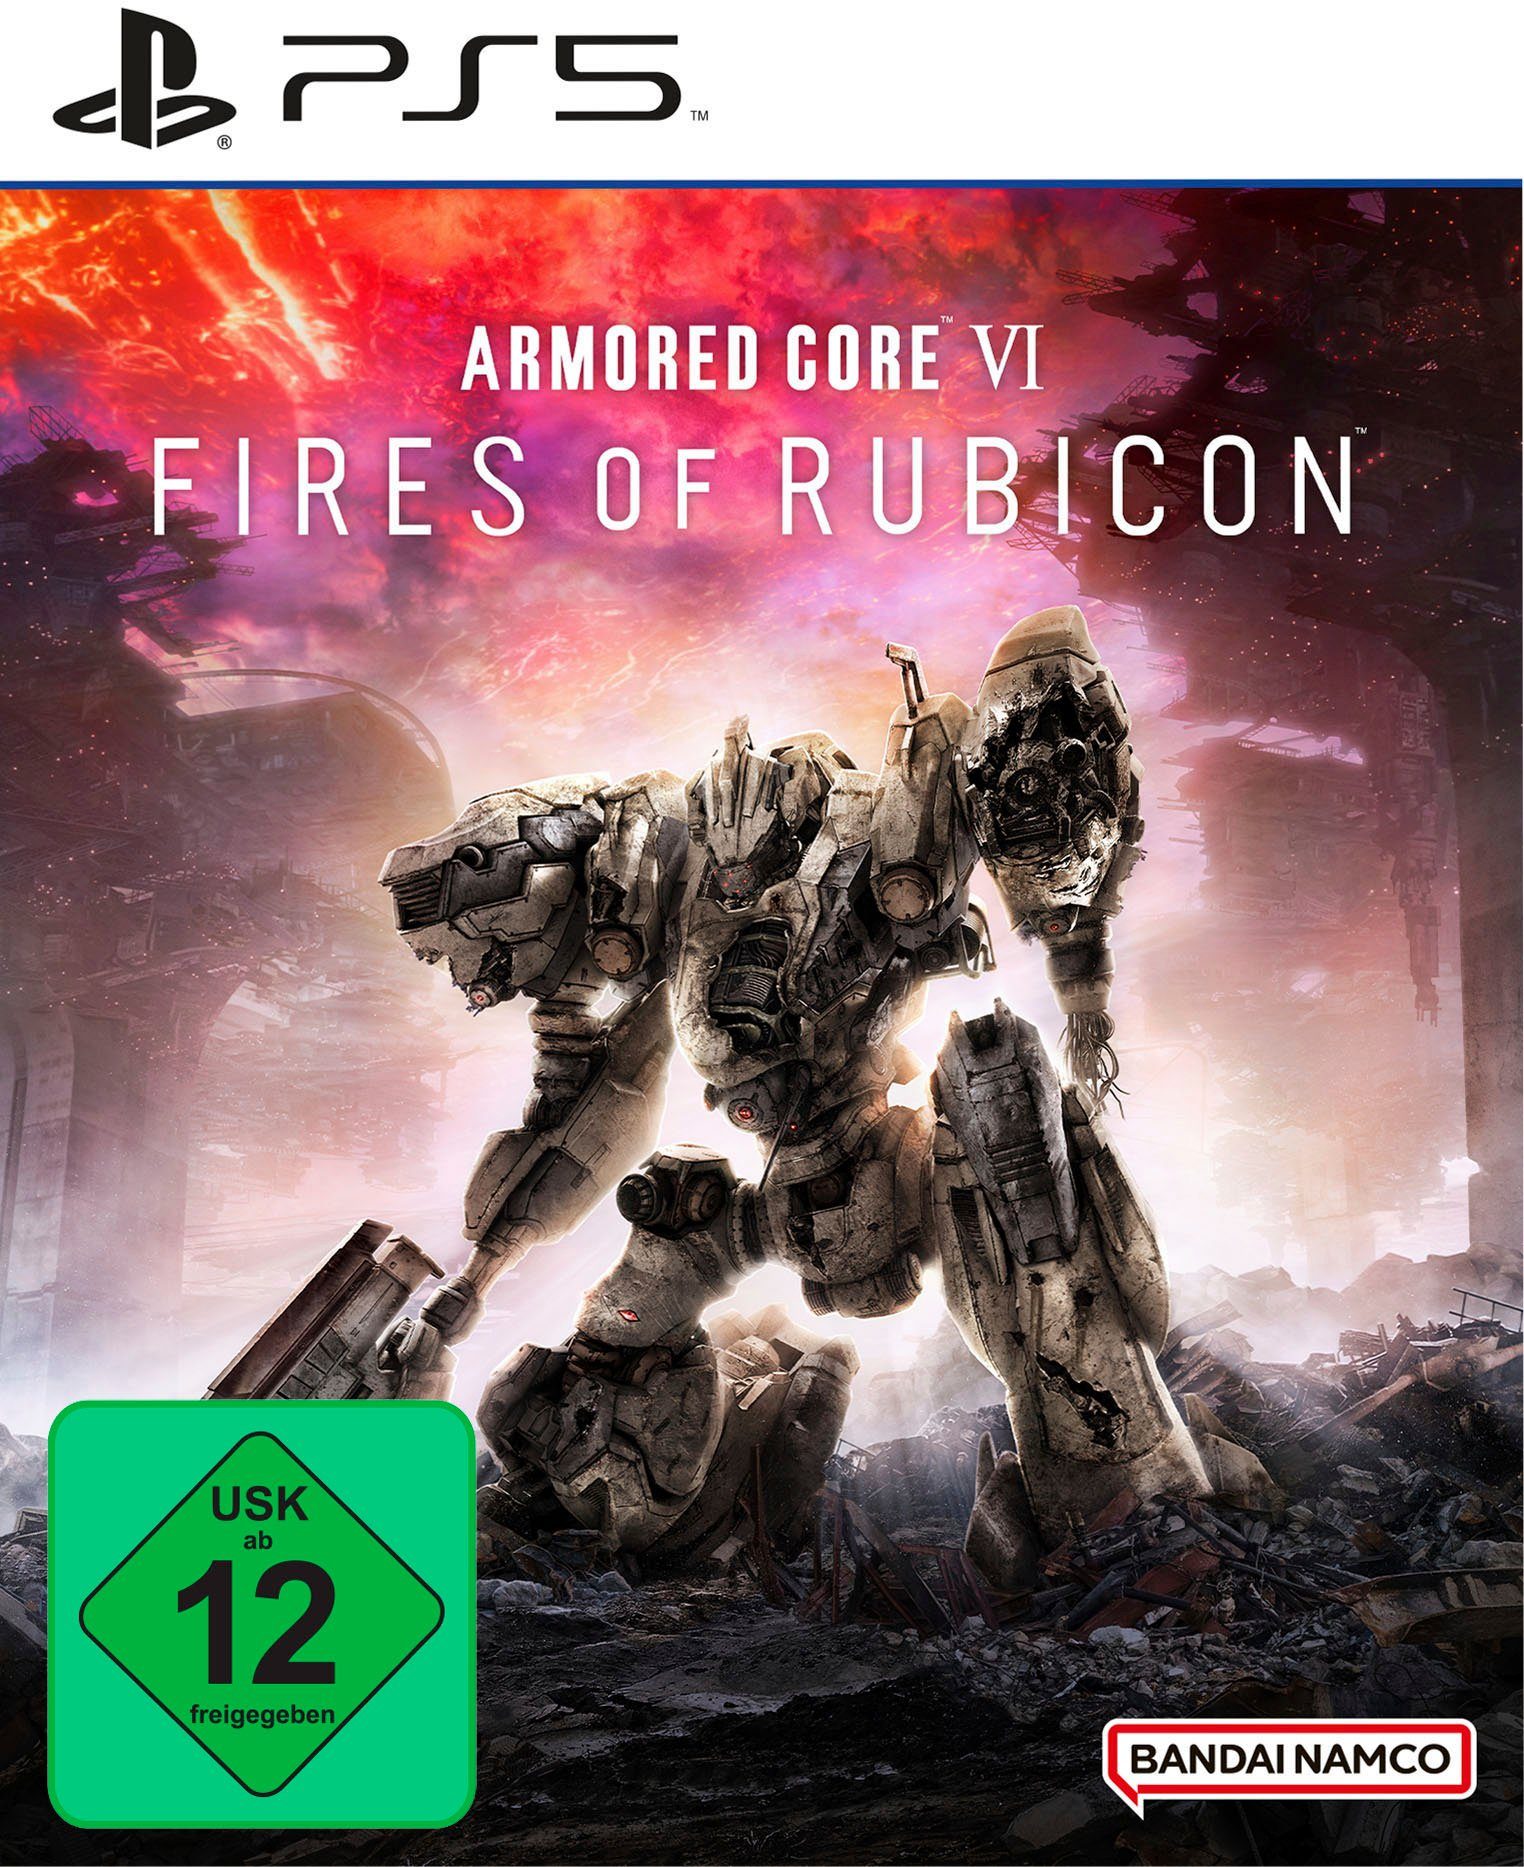 PlayStation Bandai Rubicon Edition Core 5 Fires Launch of Armored VI